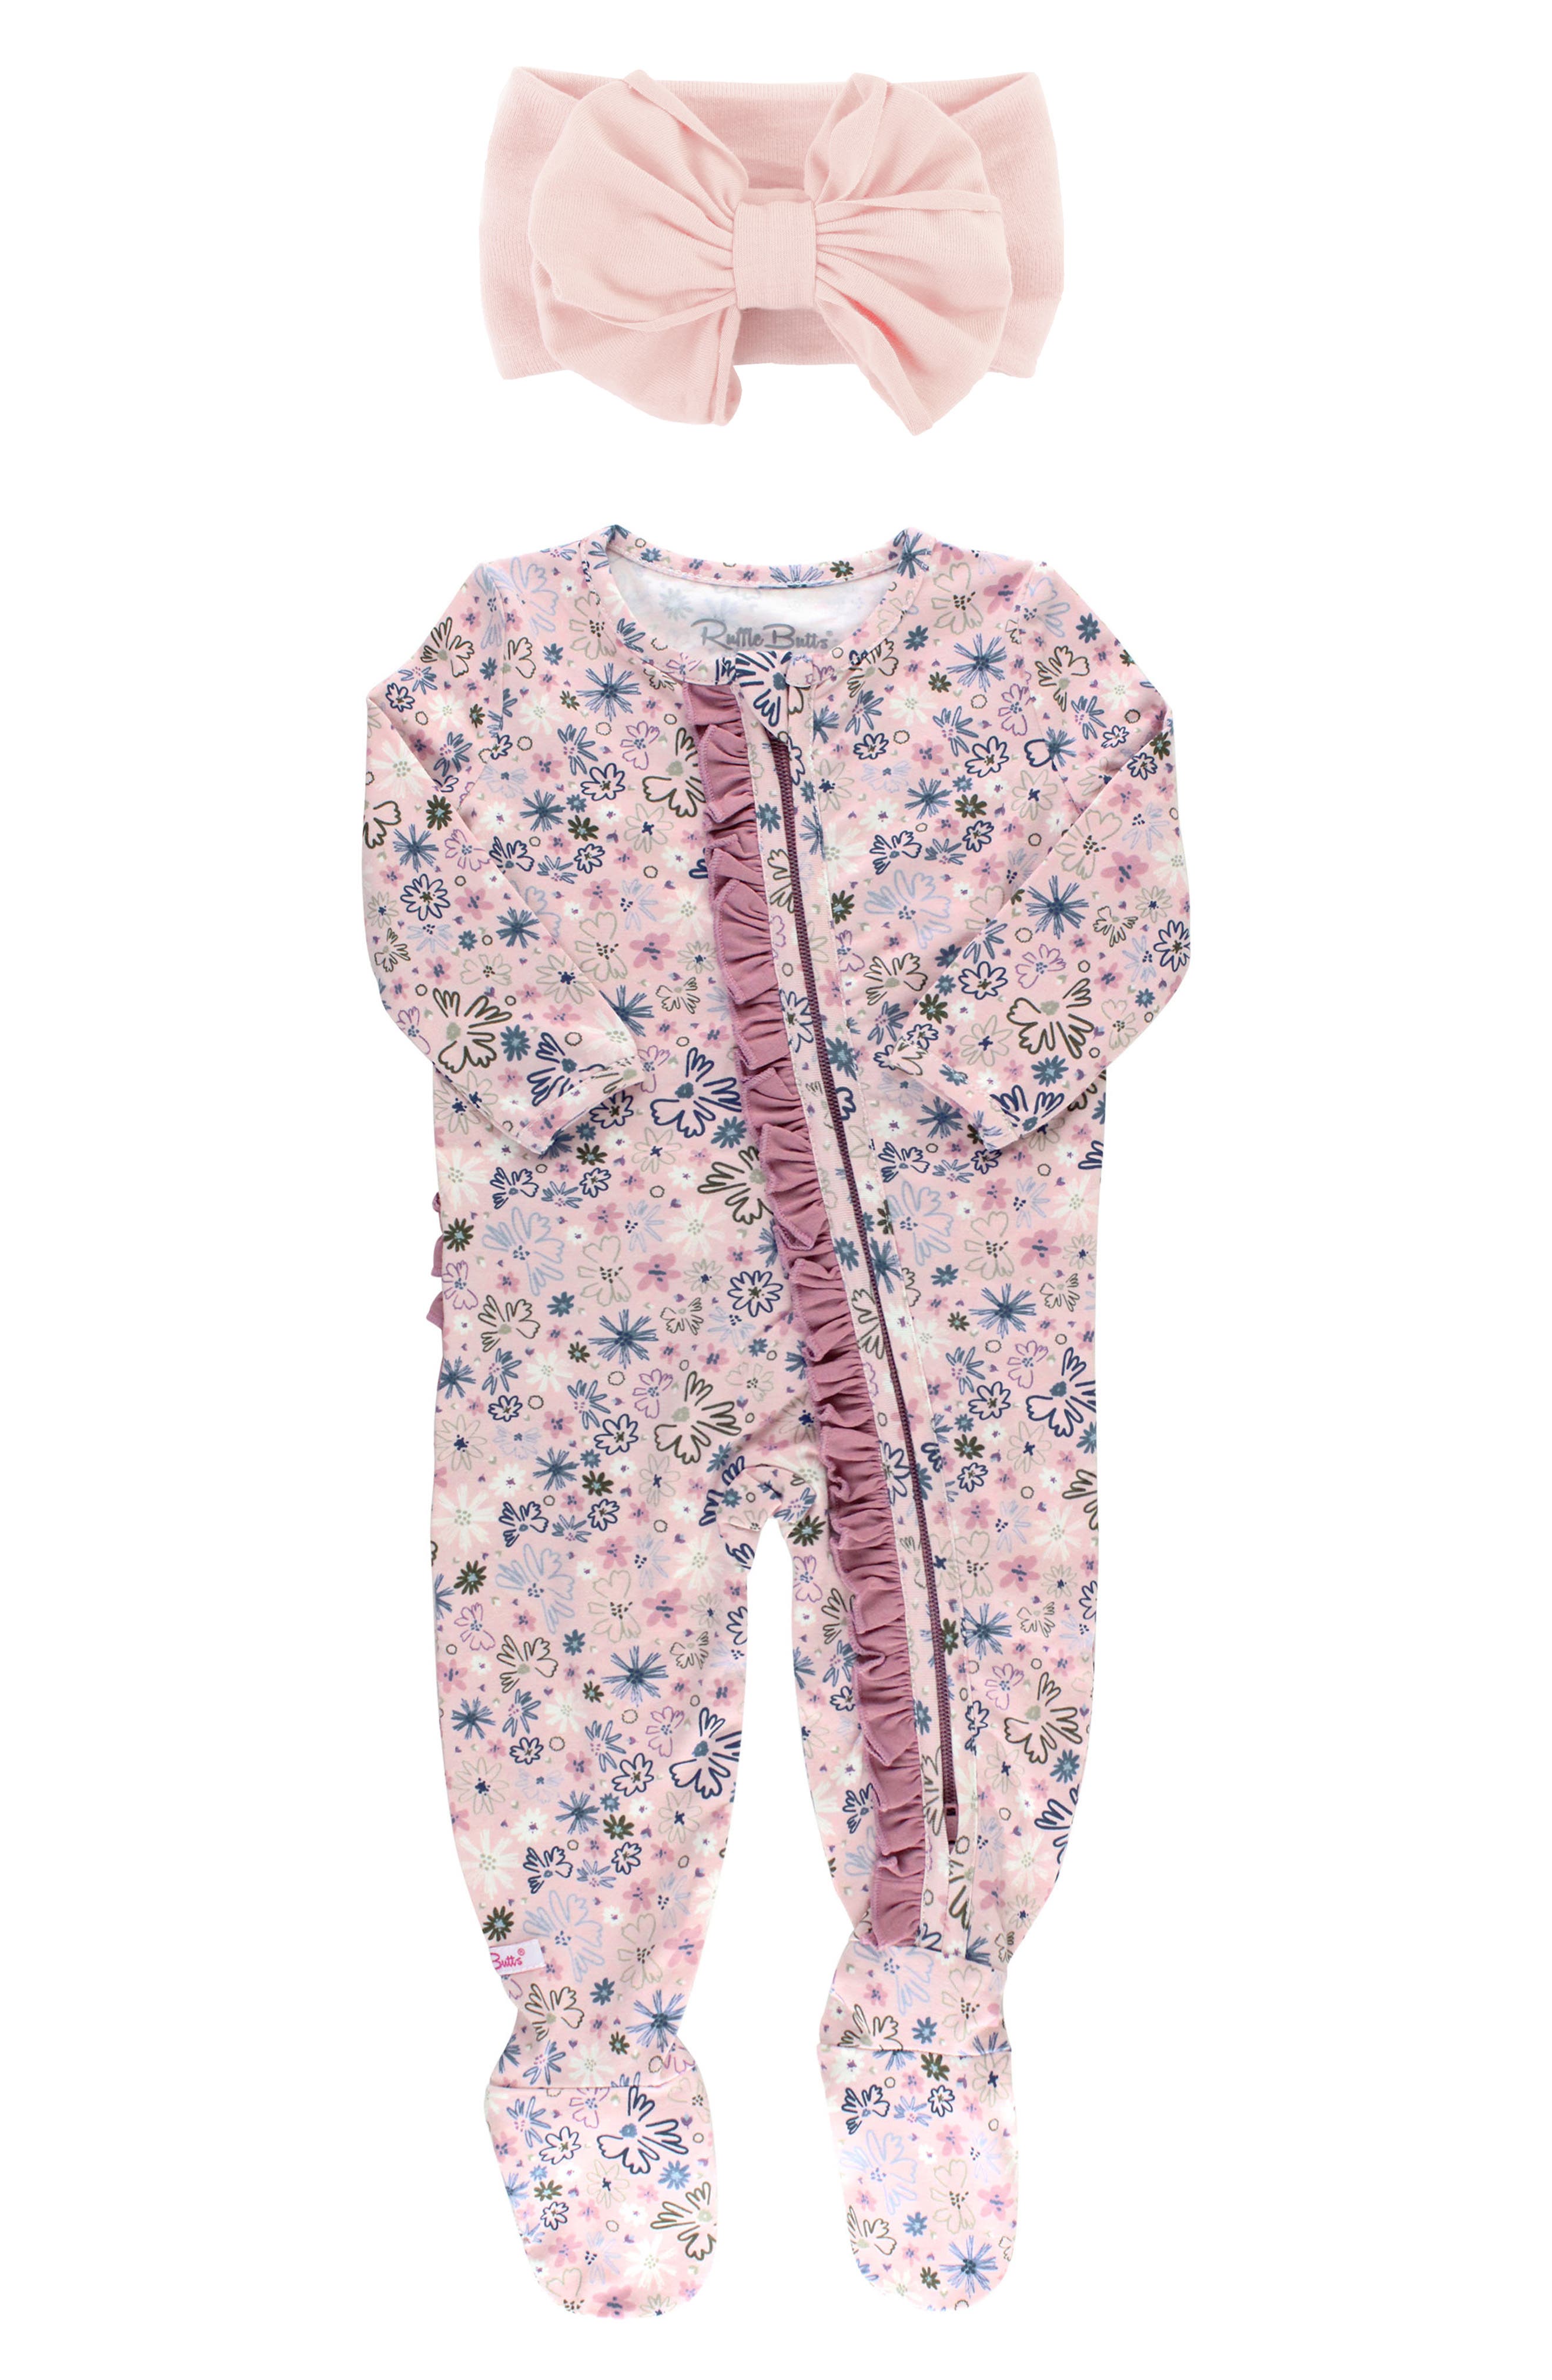 Nordstrom Baby Clothing Loungewear Pajamas Cozy Rainbow Ruffle Fitted One-Piece Footie Pajamas & Head Wrap Set in White at Nordstrom 